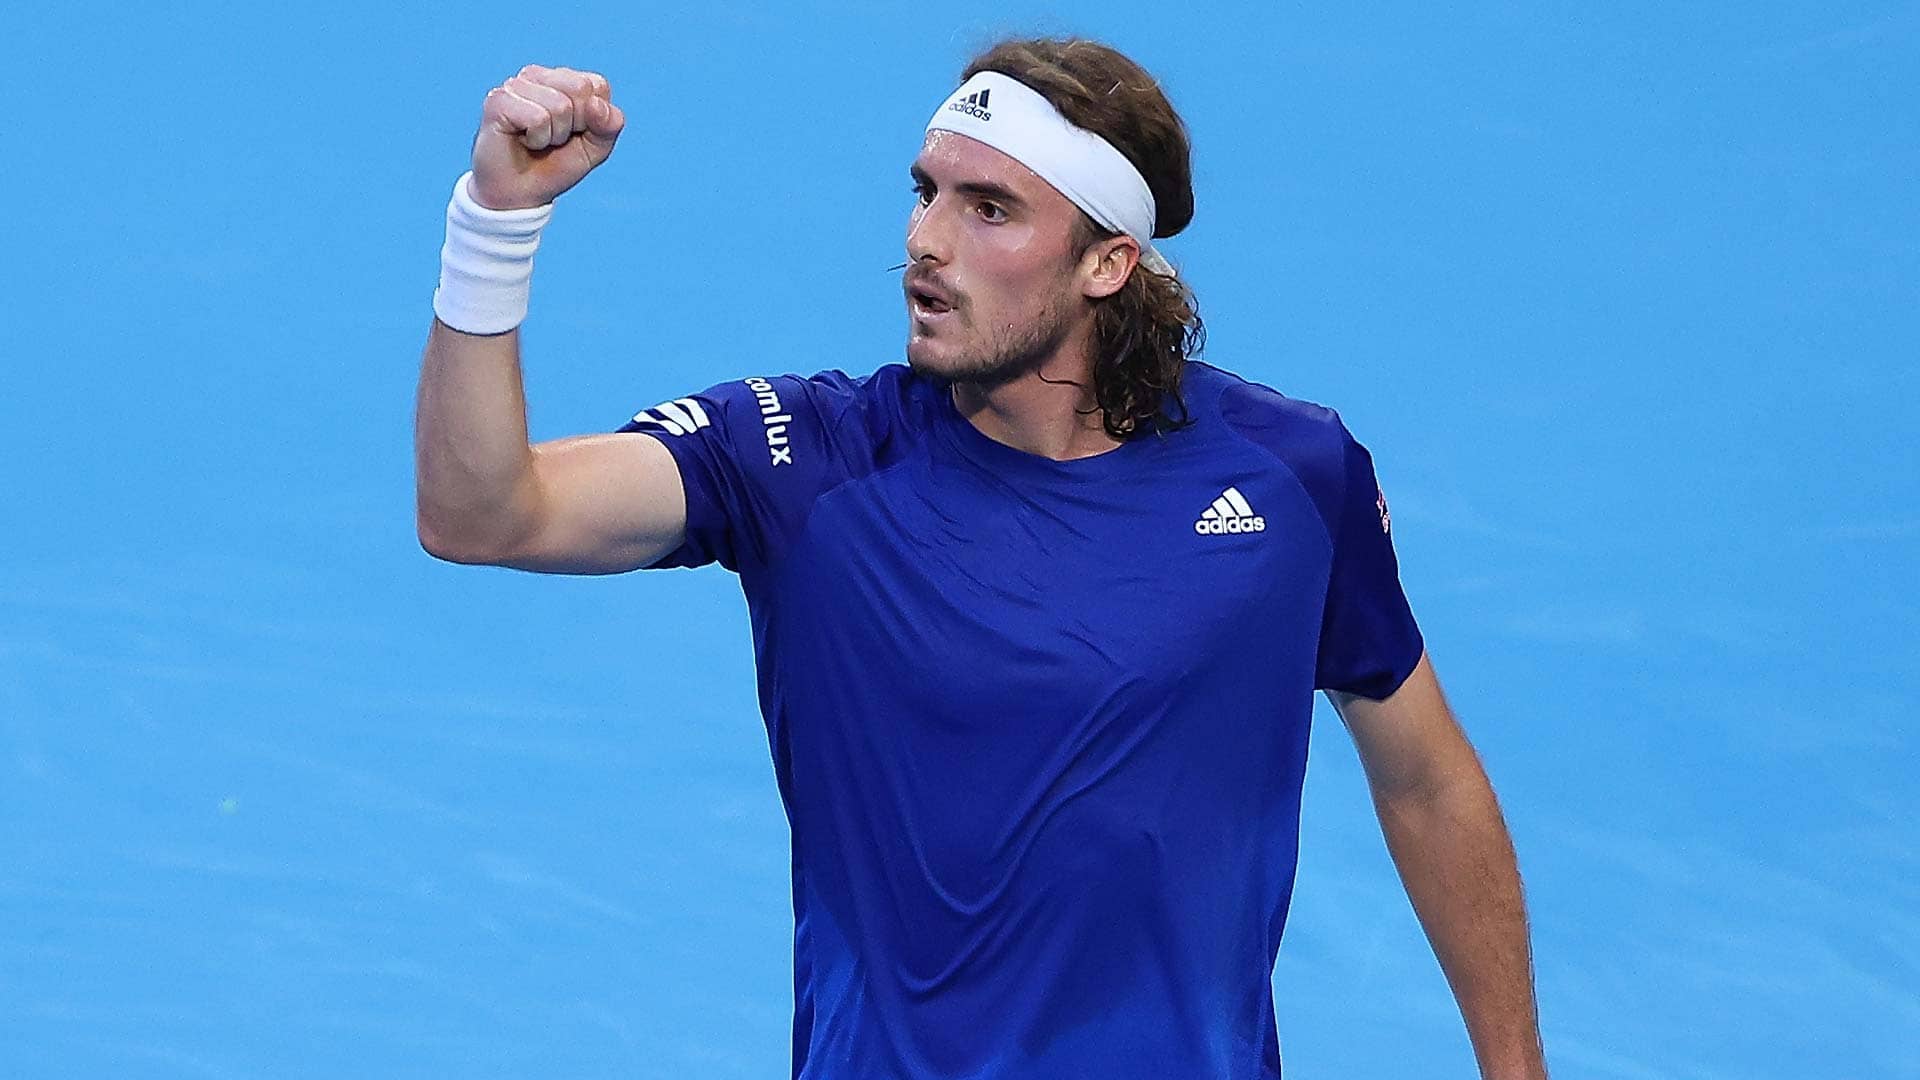 Stefanos Tsitsipas Fends Off Grigor Dimitrov In Thriller To Give Greece 2-0 Lead United Cup Tennis